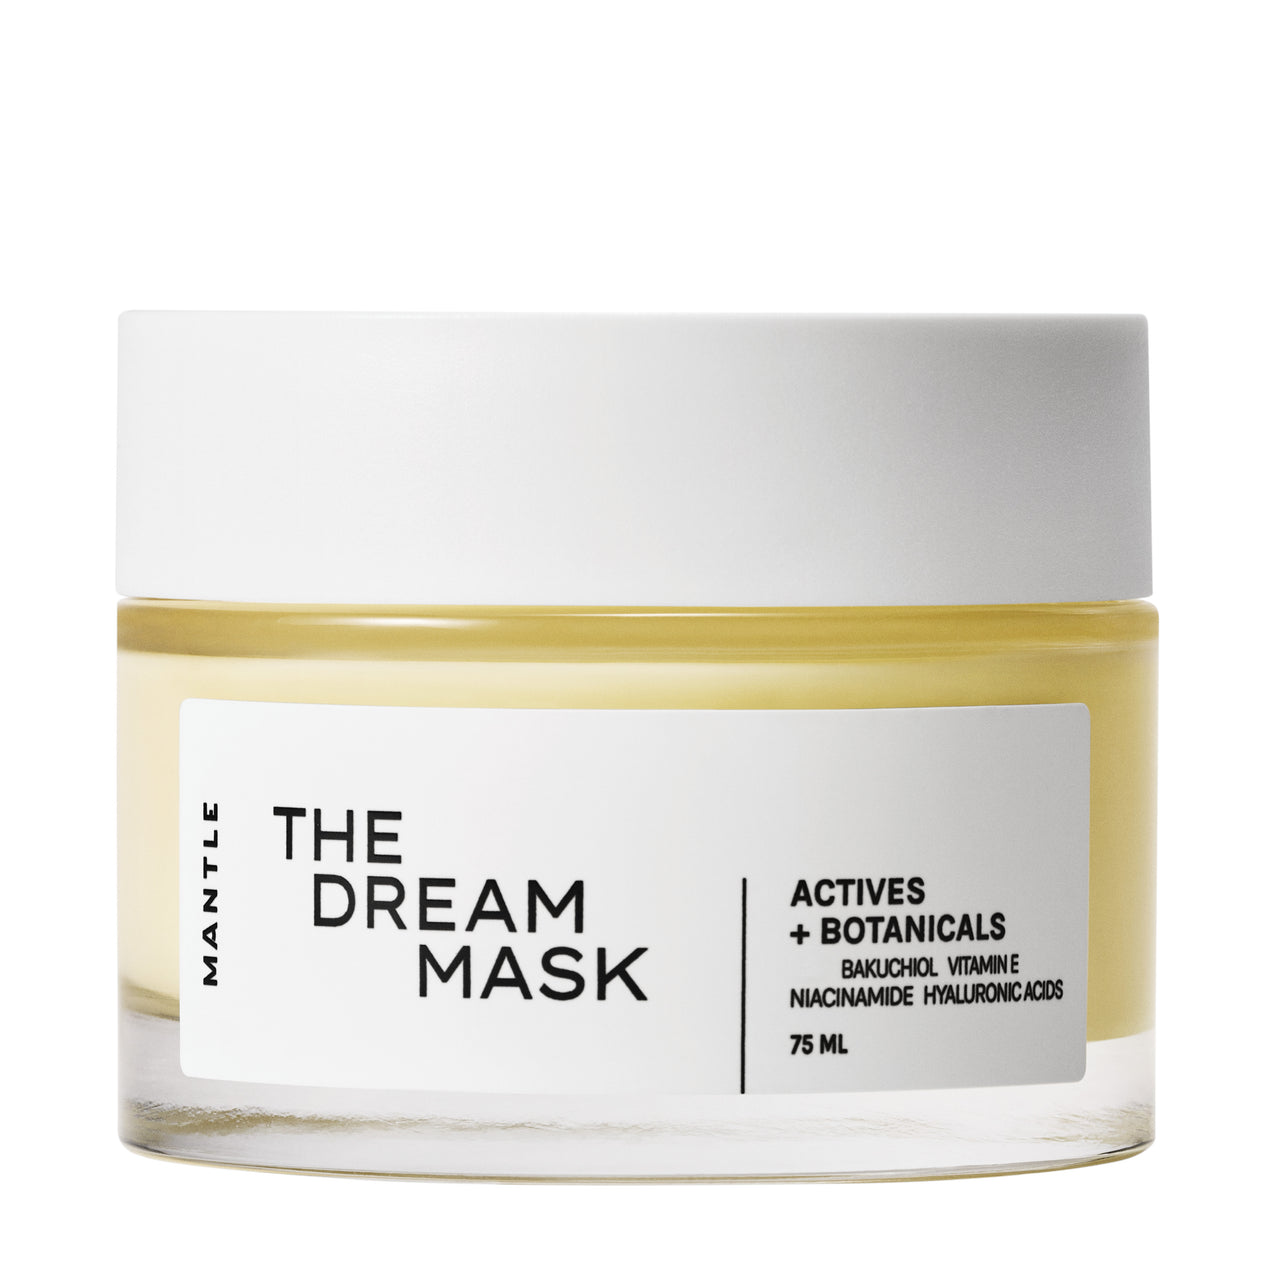 MANTLE The Dream Mask - Night Mask